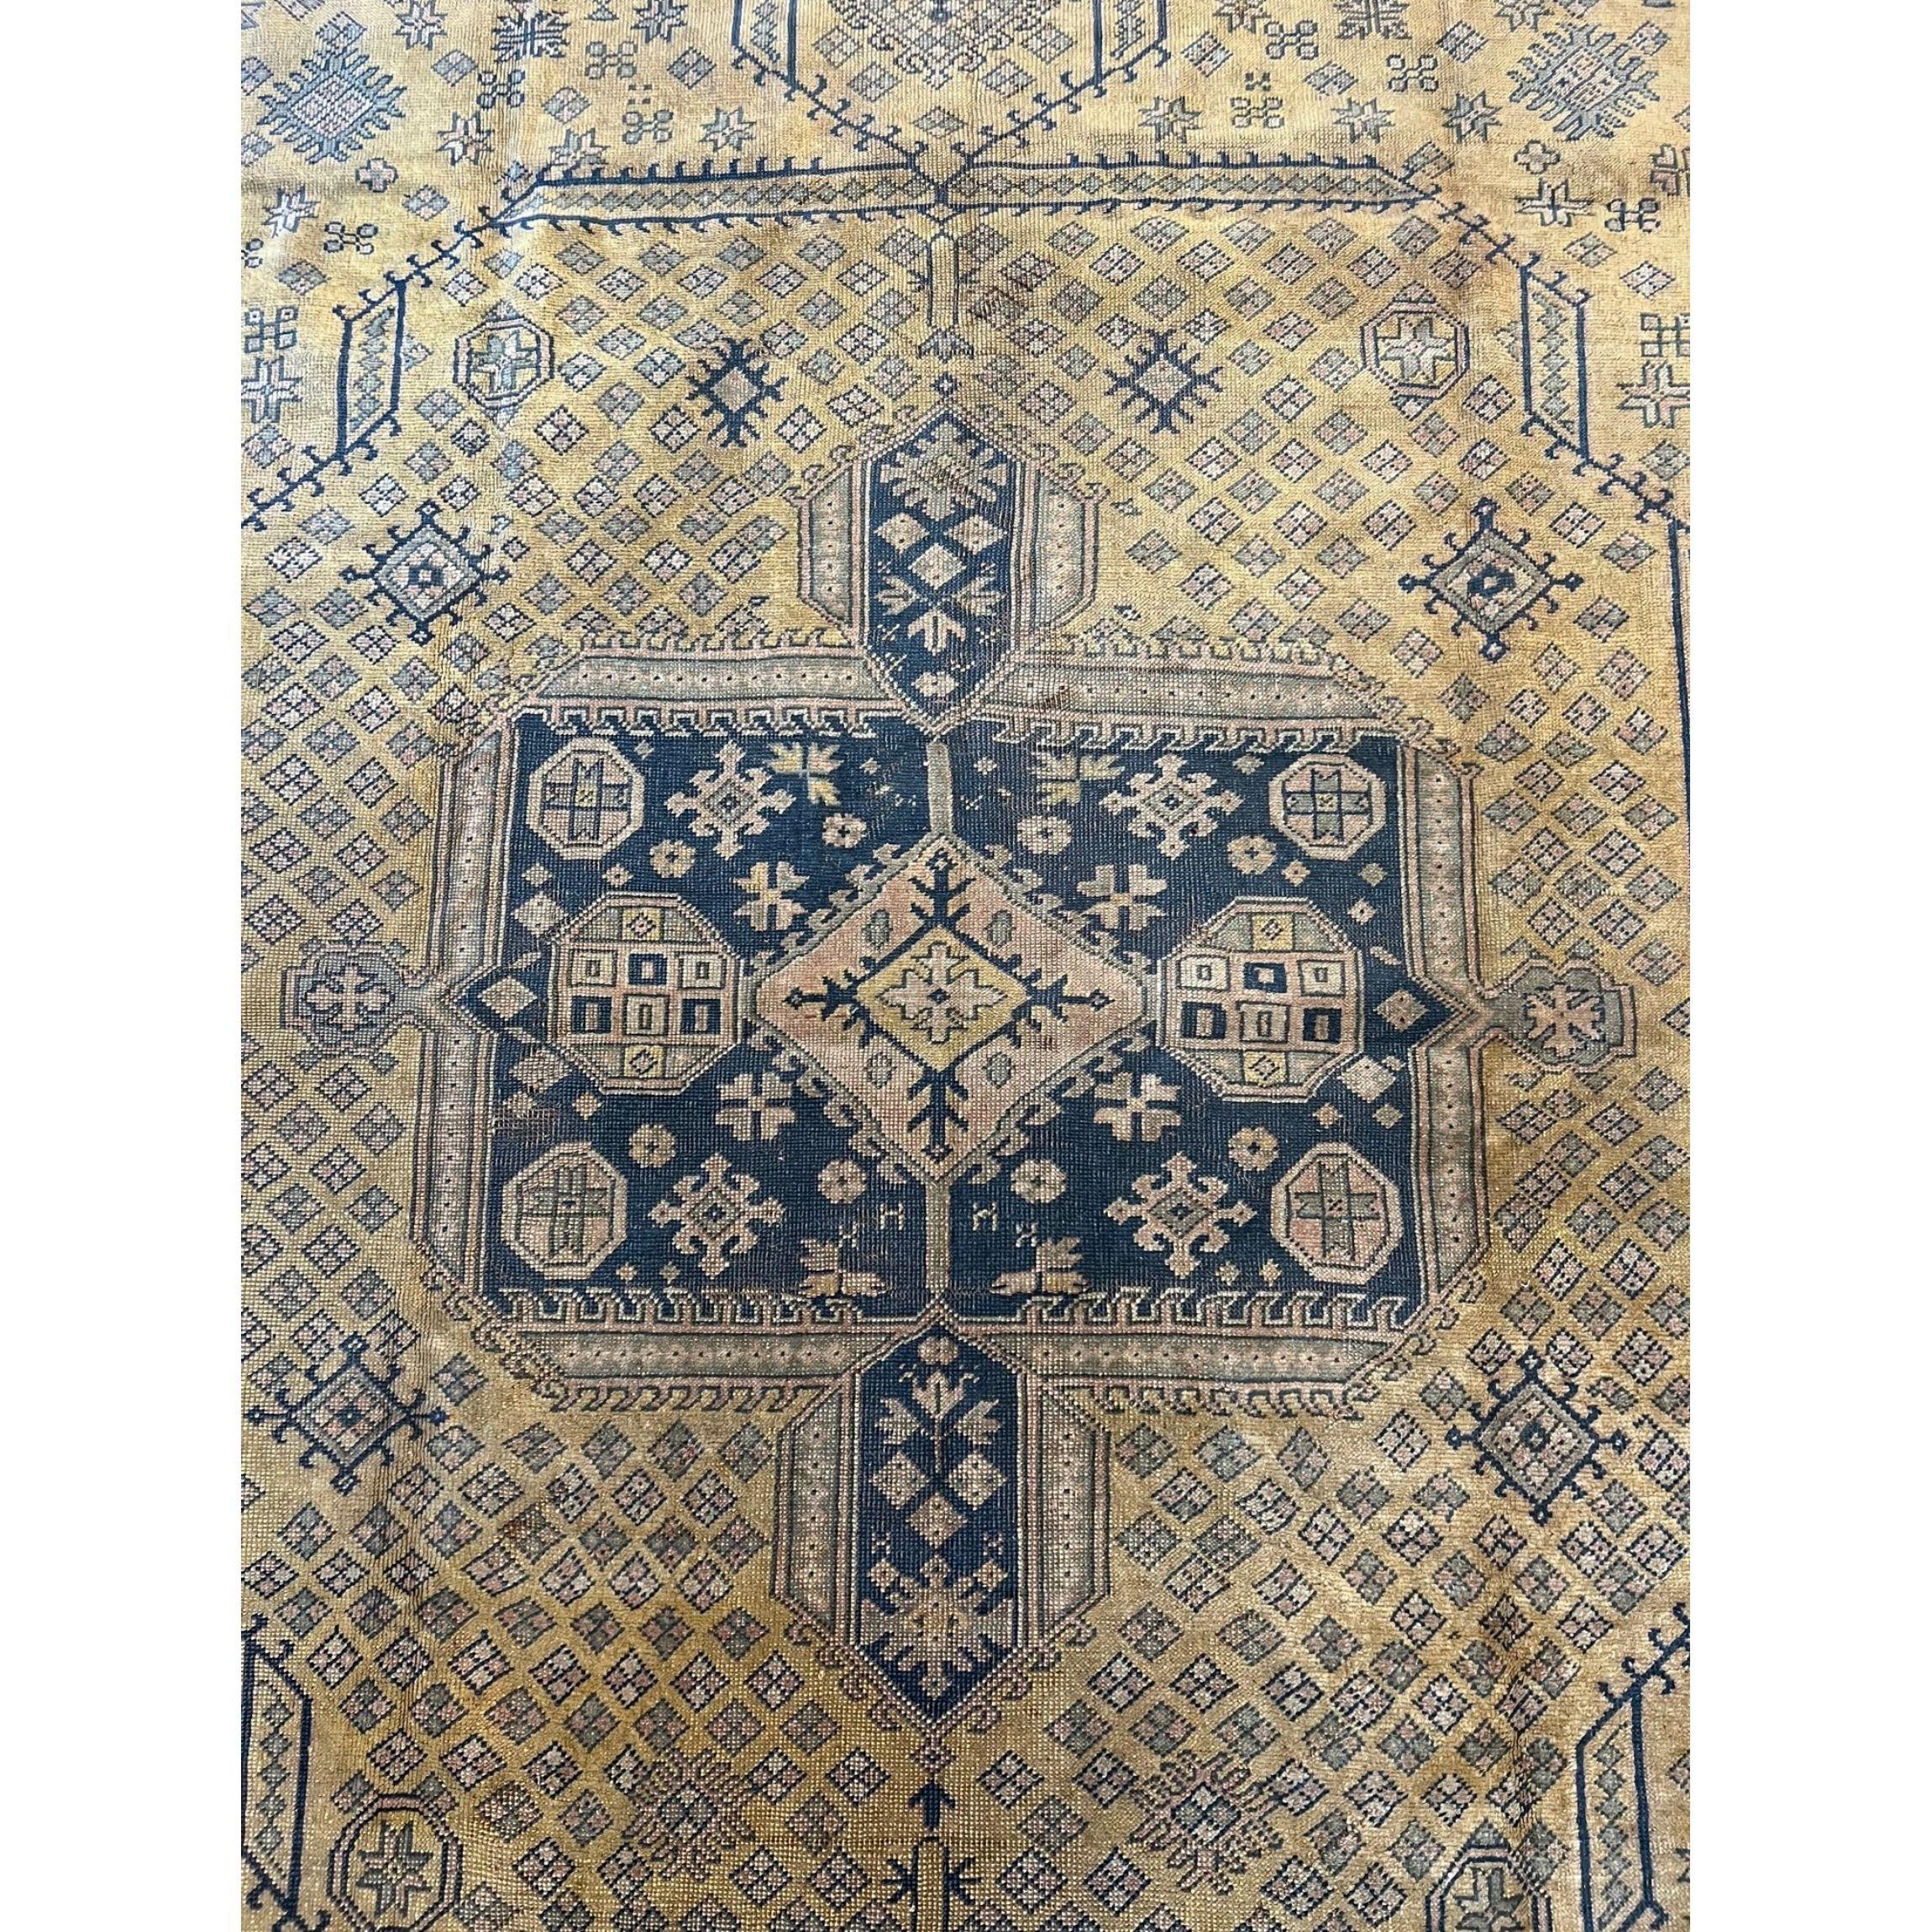 Antique Oushak Rug 10.8x9.2 In Good Condition For Sale In Los Angeles, US